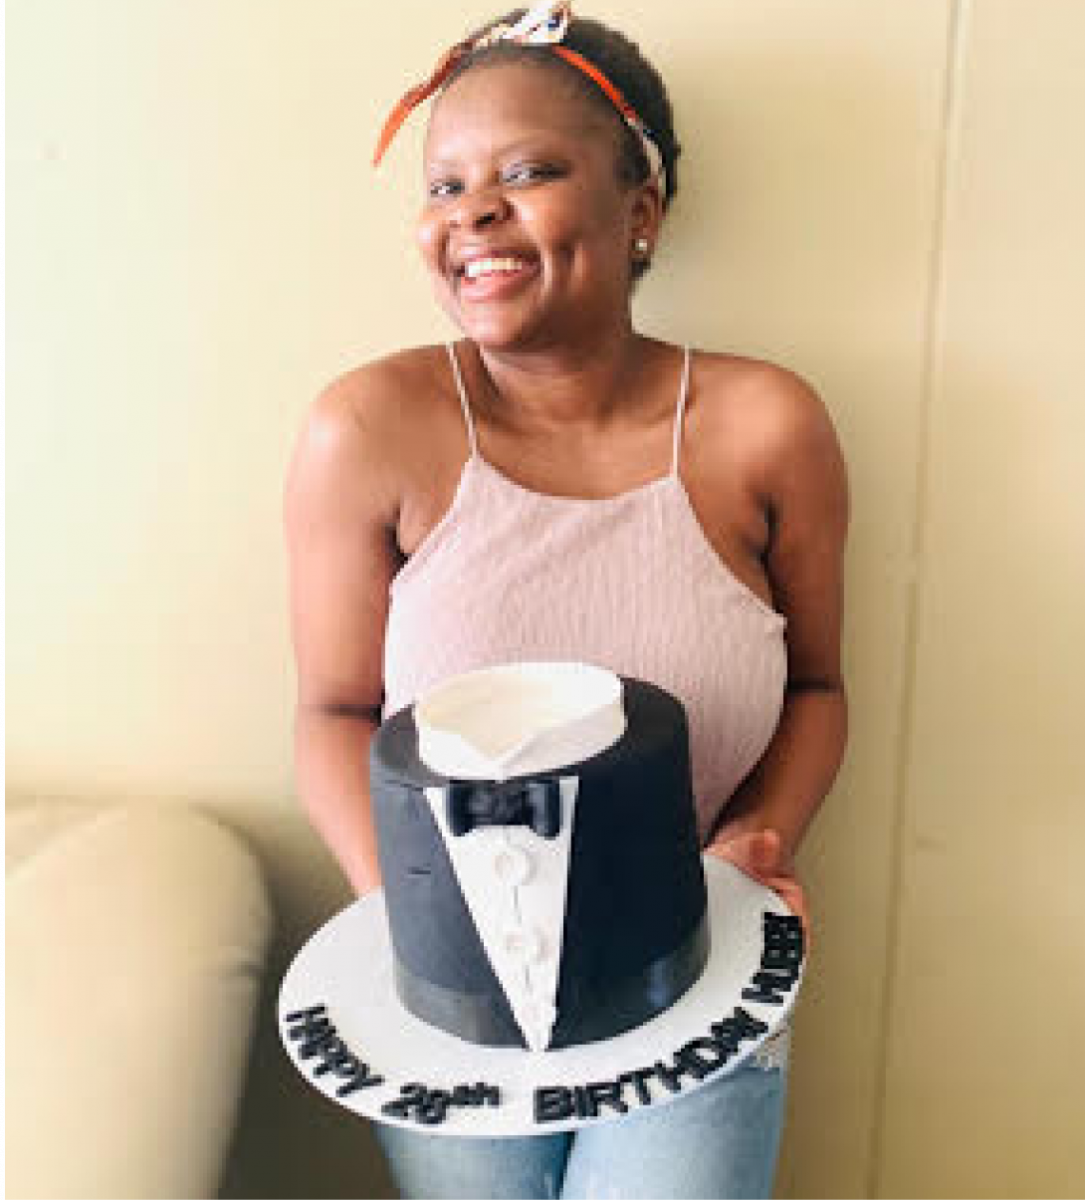 Pfarelo Tshivhase rolled up her sleeves and found solace in baking after being retrenched due to the COVID-19 pandemic.